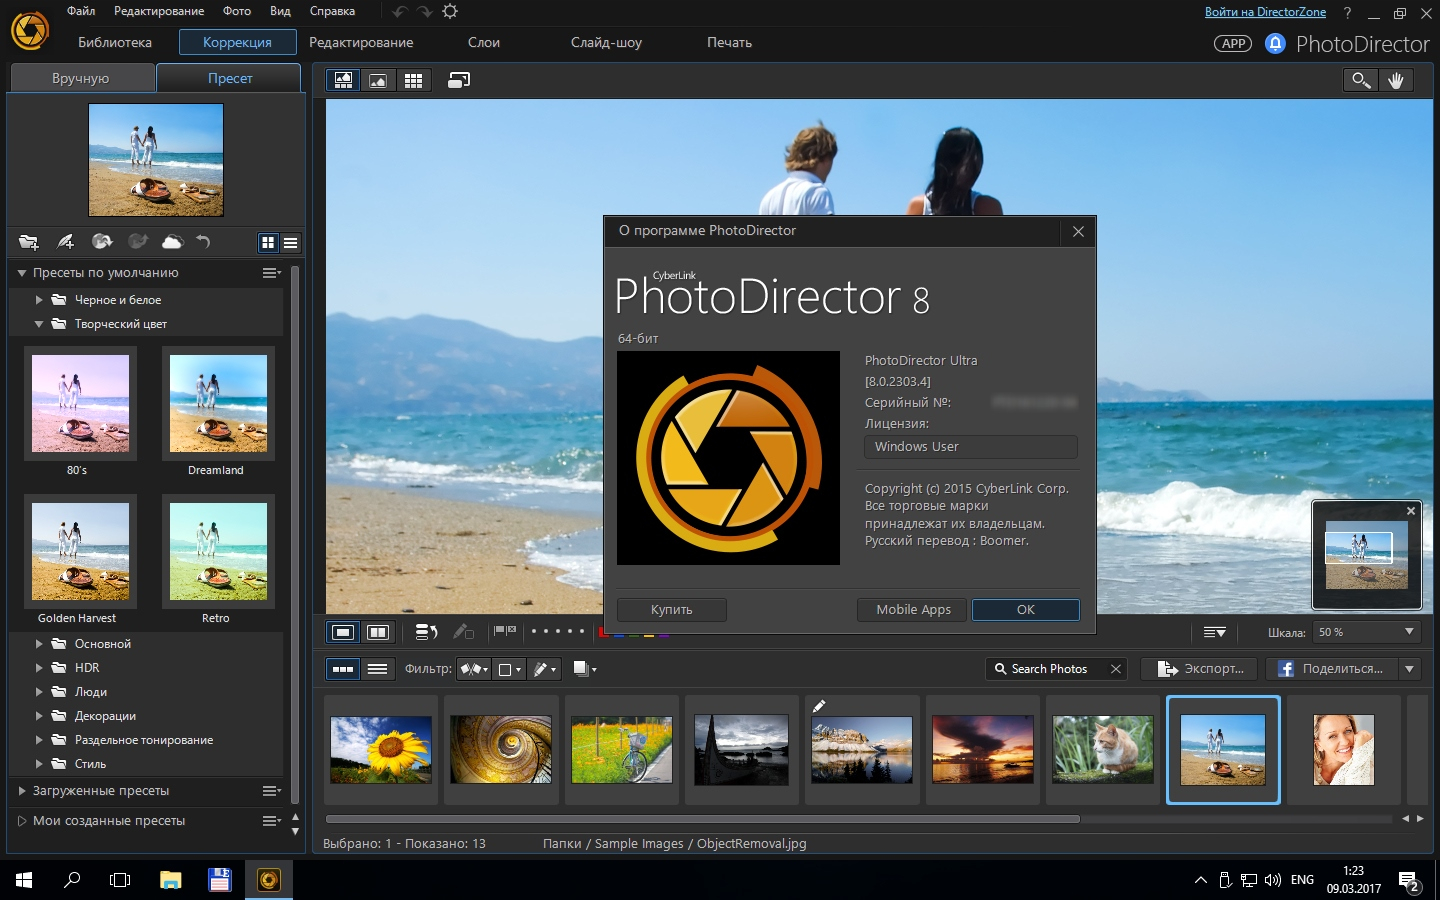 instal the last version for apple CyberLink PhotoDirector Ultra 15.0.1013.0